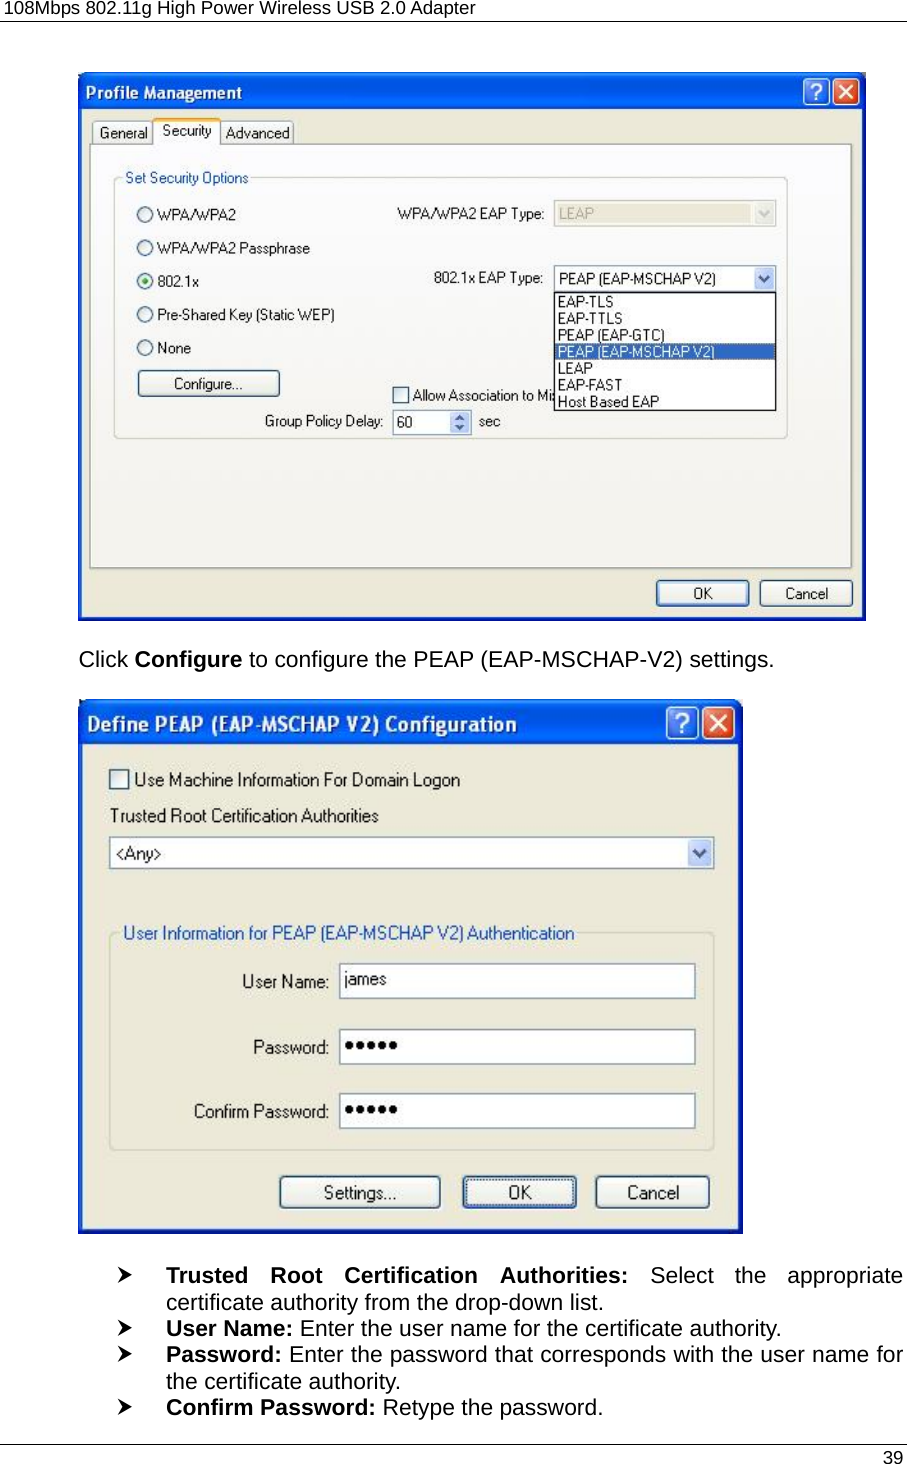 108Mbps 802.11g High Power Wireless USB 2.0 Adapter       39    Click Configure to configure the PEAP (EAP-MSCHAP-V2) settings.    h Trusted Root Certification Authorities: Select the appropriate certificate authority from the drop-down list.   h User Name: Enter the user name for the certificate authority. h Password: Enter the password that corresponds with the user name for the certificate authority. h Confirm Password: Retype the password.  